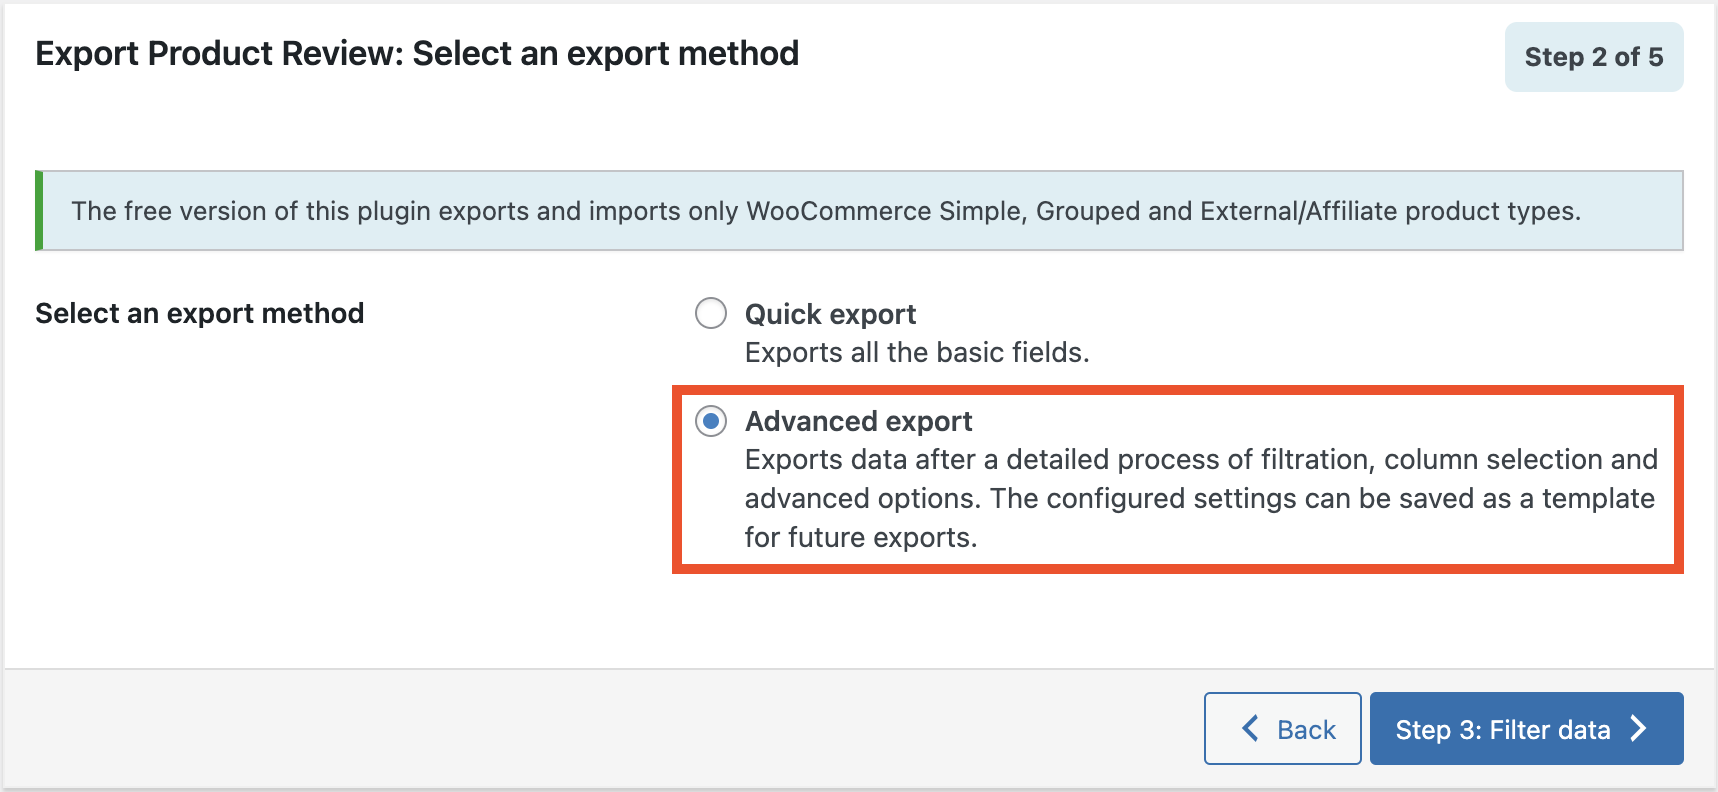 Select Advanced export option for exporting product reviews